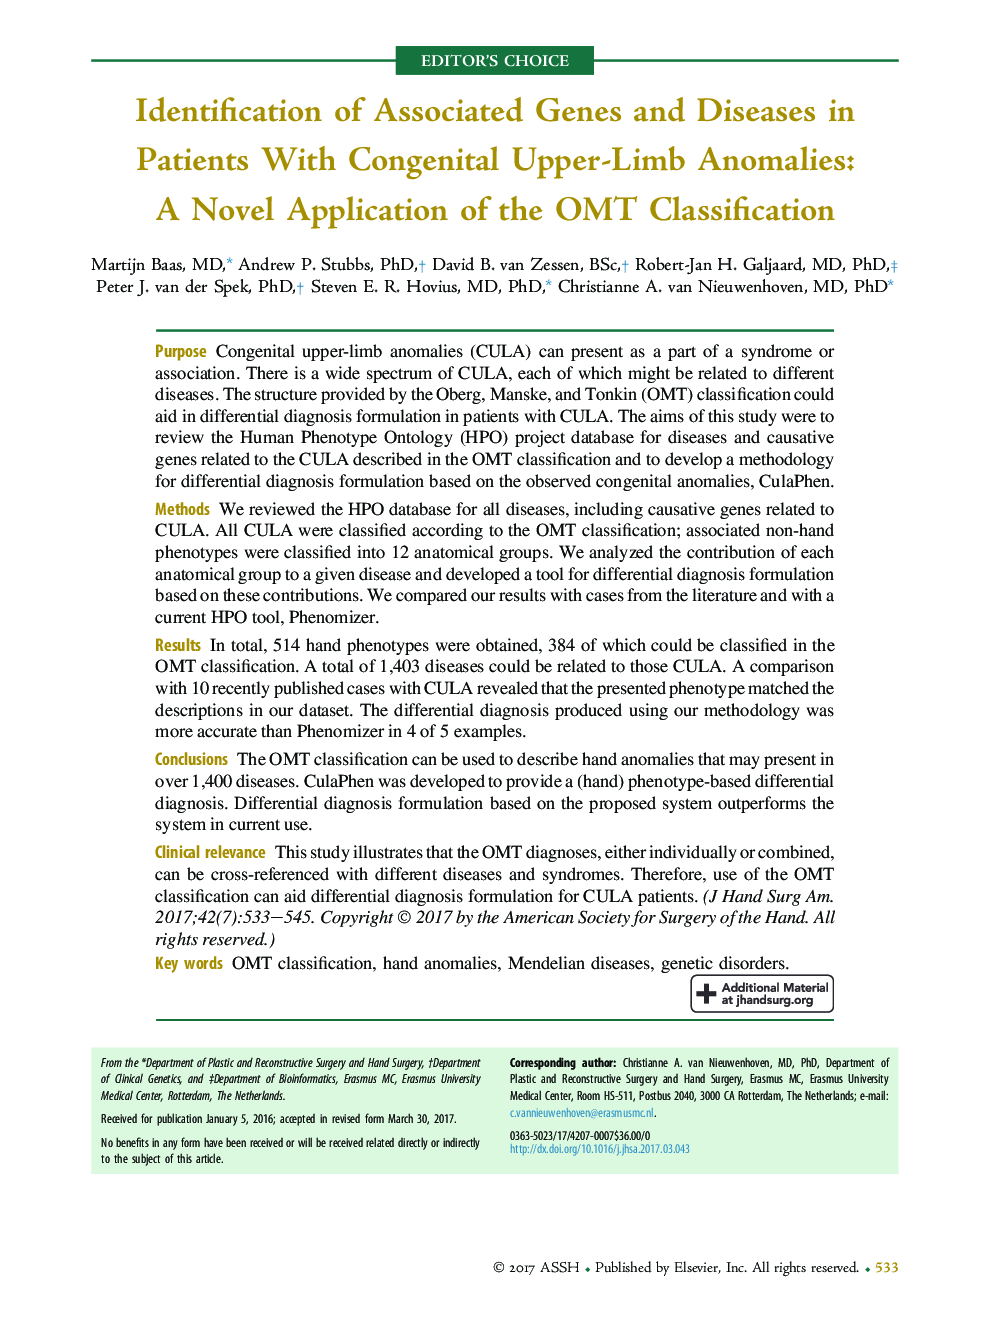 Identification of Associated Genes and Diseases in Patients With Congenital Upper-Limb Anomalies: A Novel Application of the OMT Classification